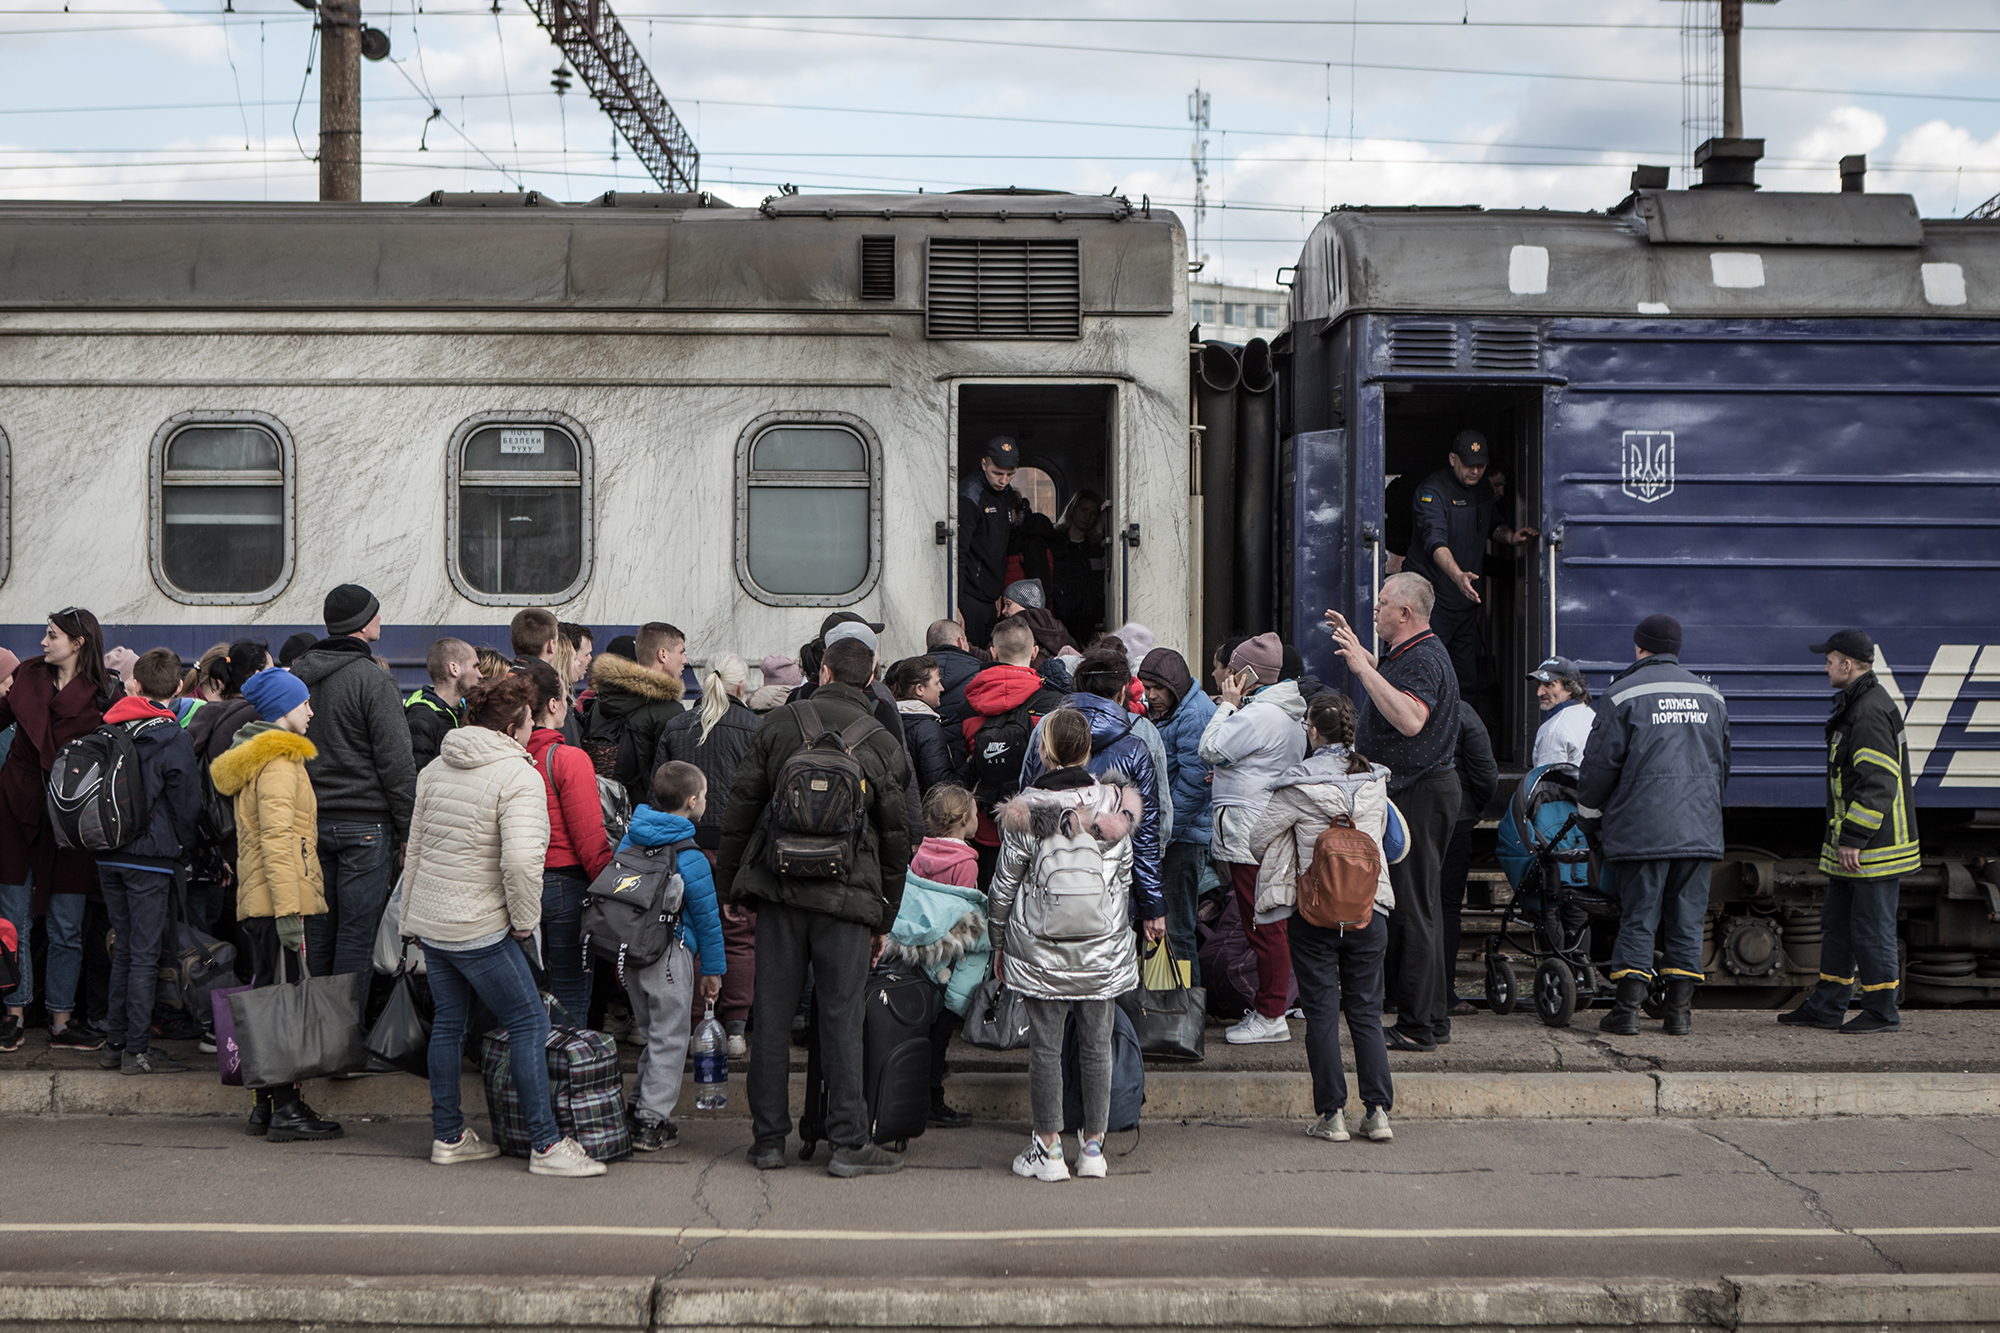 Civilians board a train as they are being evacuated from combat zones in Kramatorsk, Donetsk Oblast, in eastern Ukraine, on April 6.